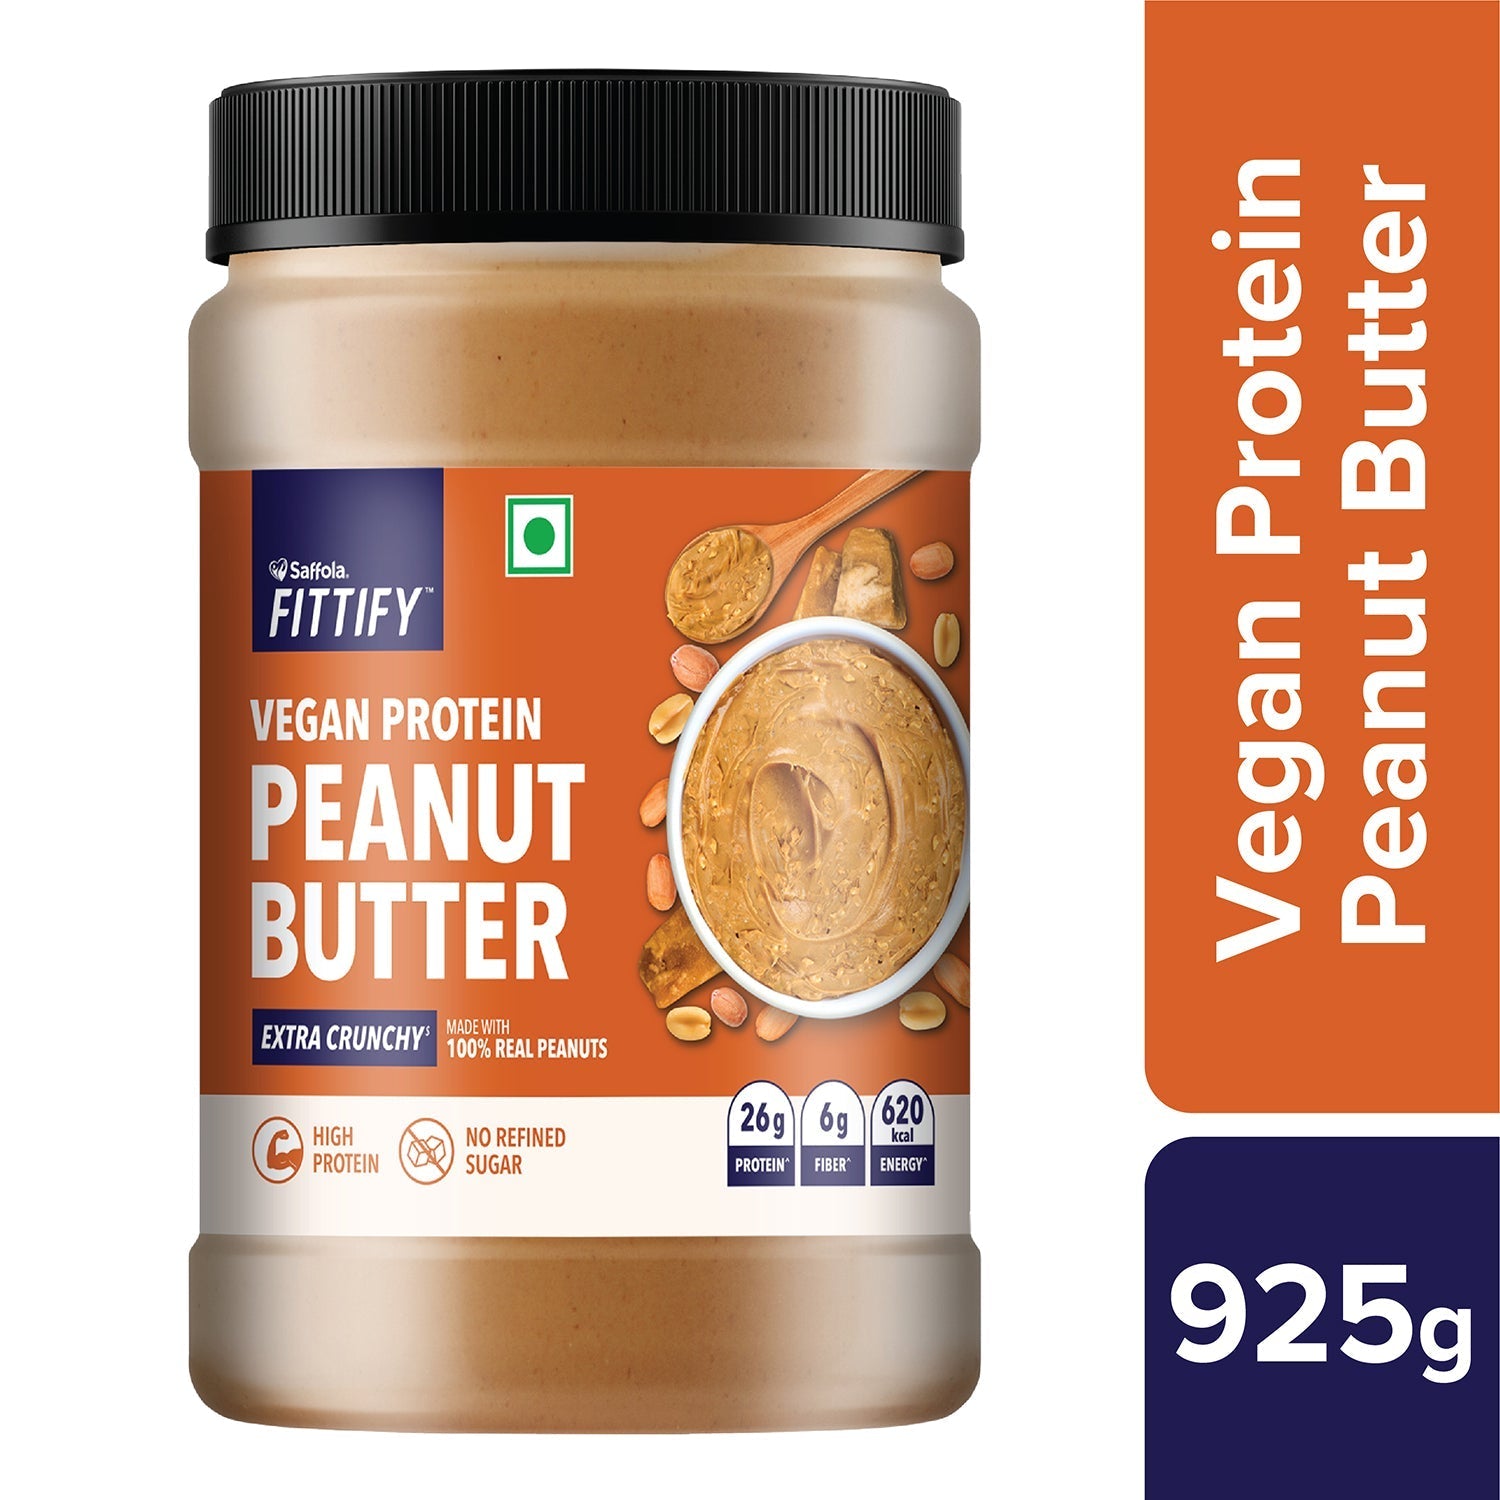 Saffola Fittify Vegan Protein - Peanut Butter (Pack of 2)